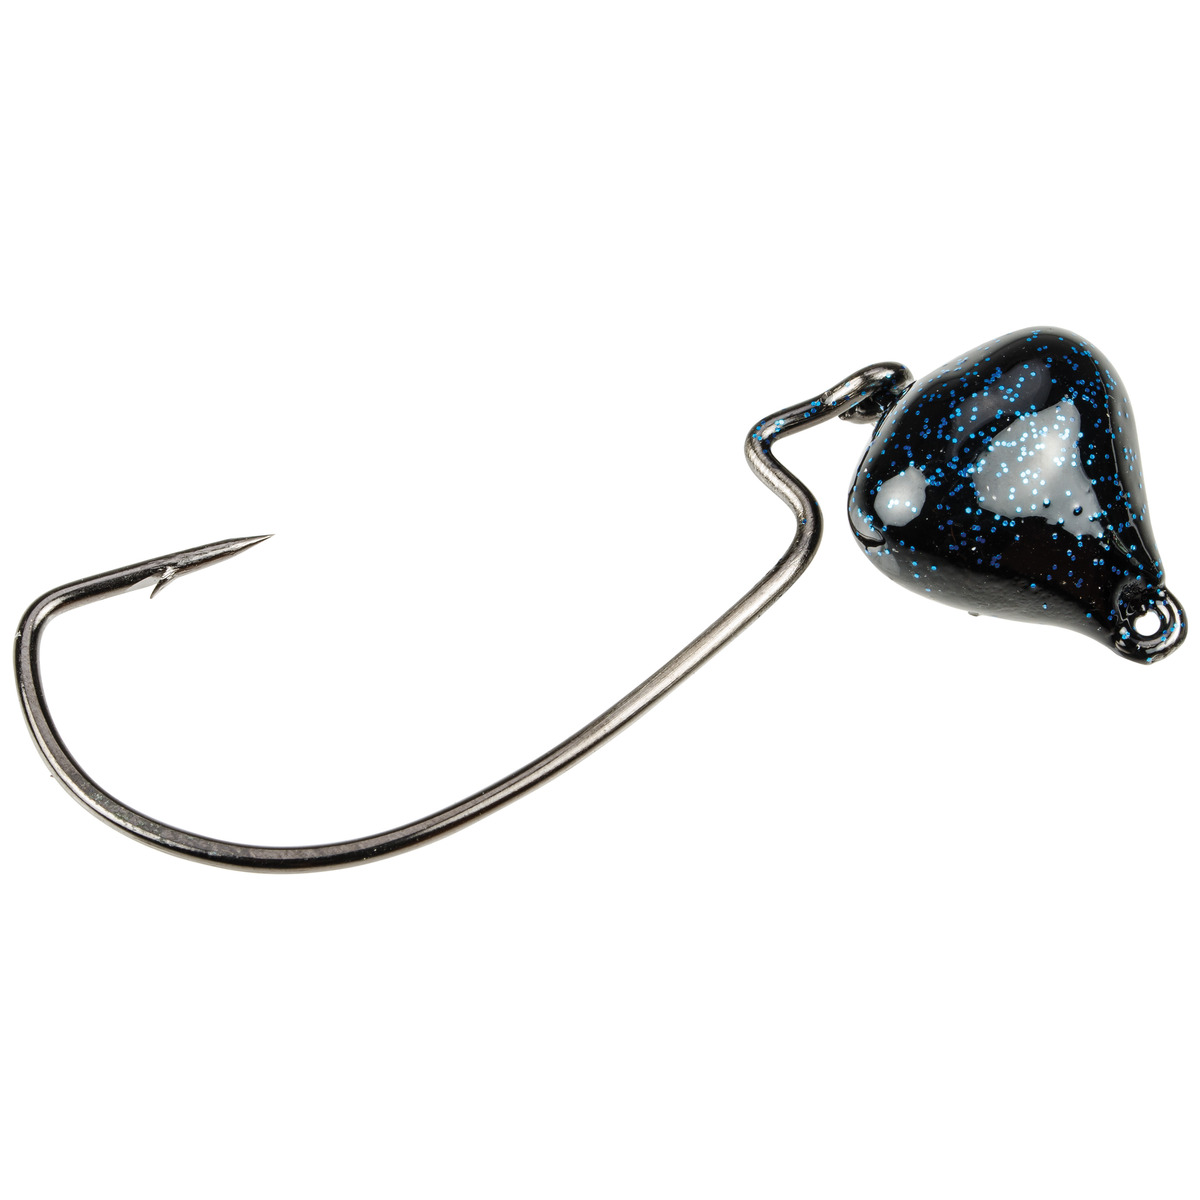 Strike King Md Jointed Structure Head - Black/Blue 21.3G